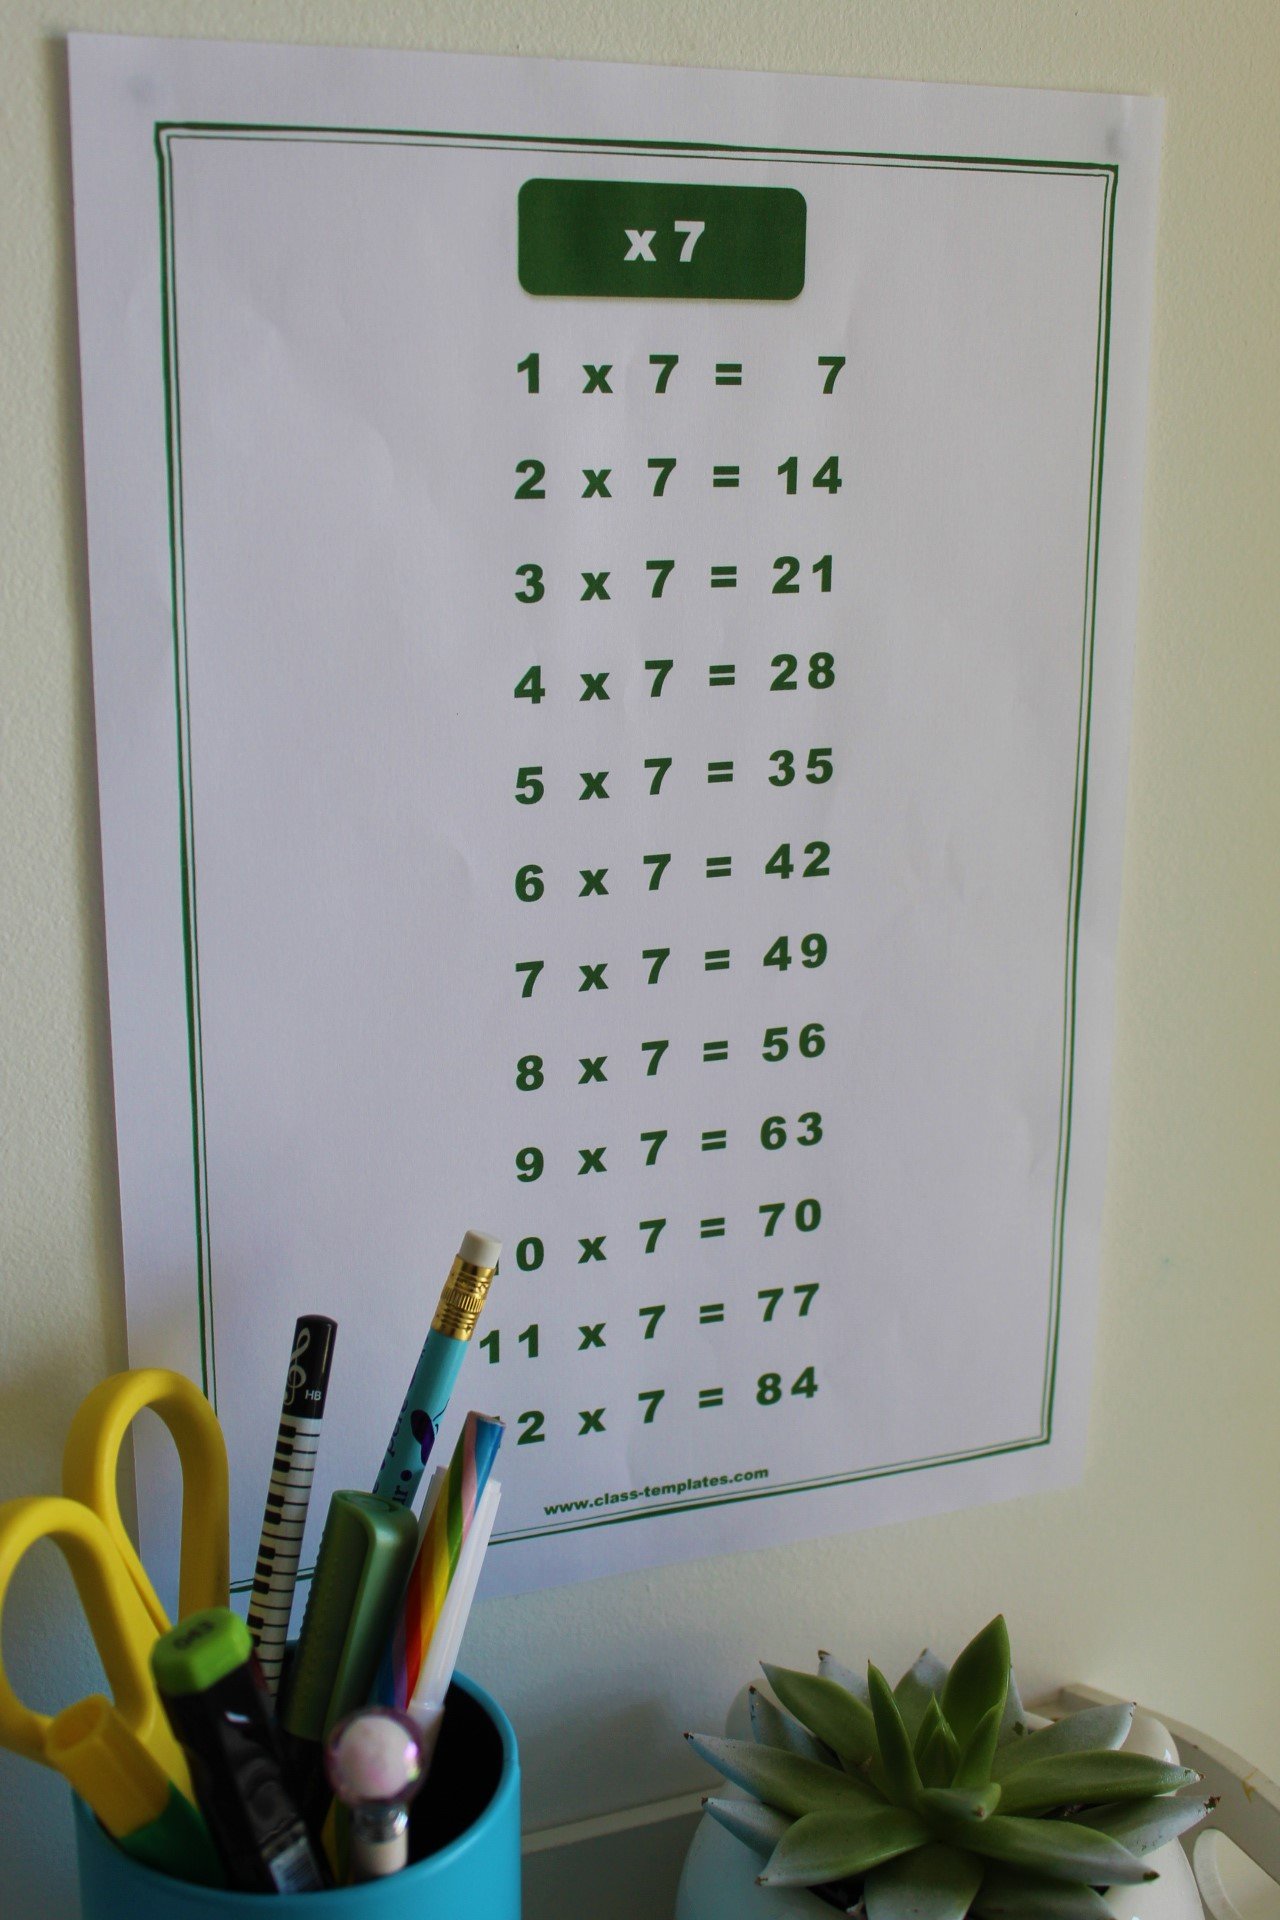 7 Times Table Chart on wall